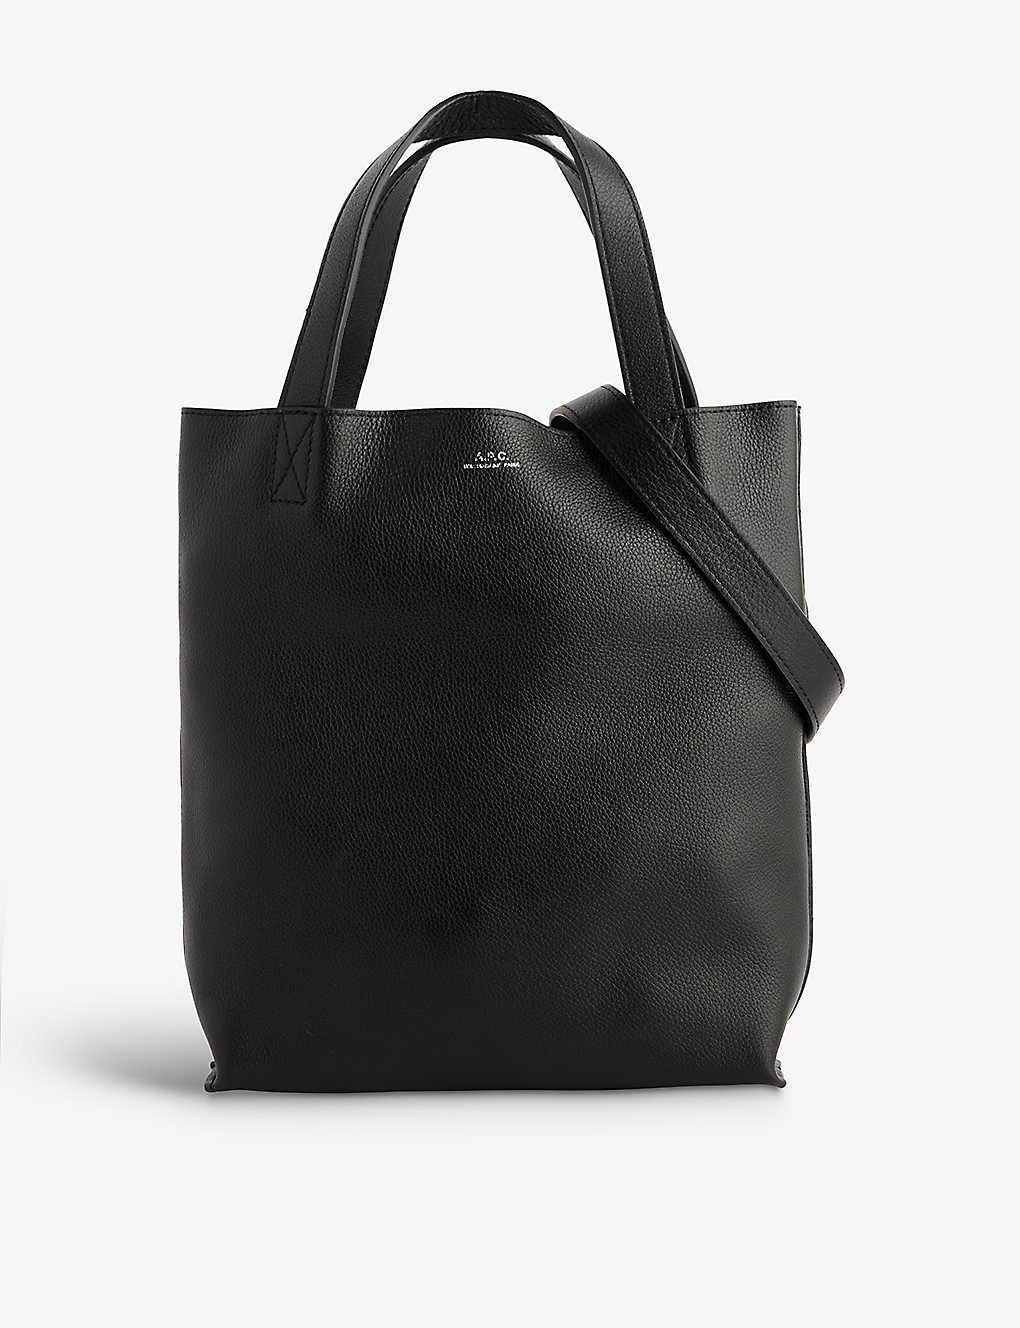 Apc Maiko Leather Tote Bag In Noir